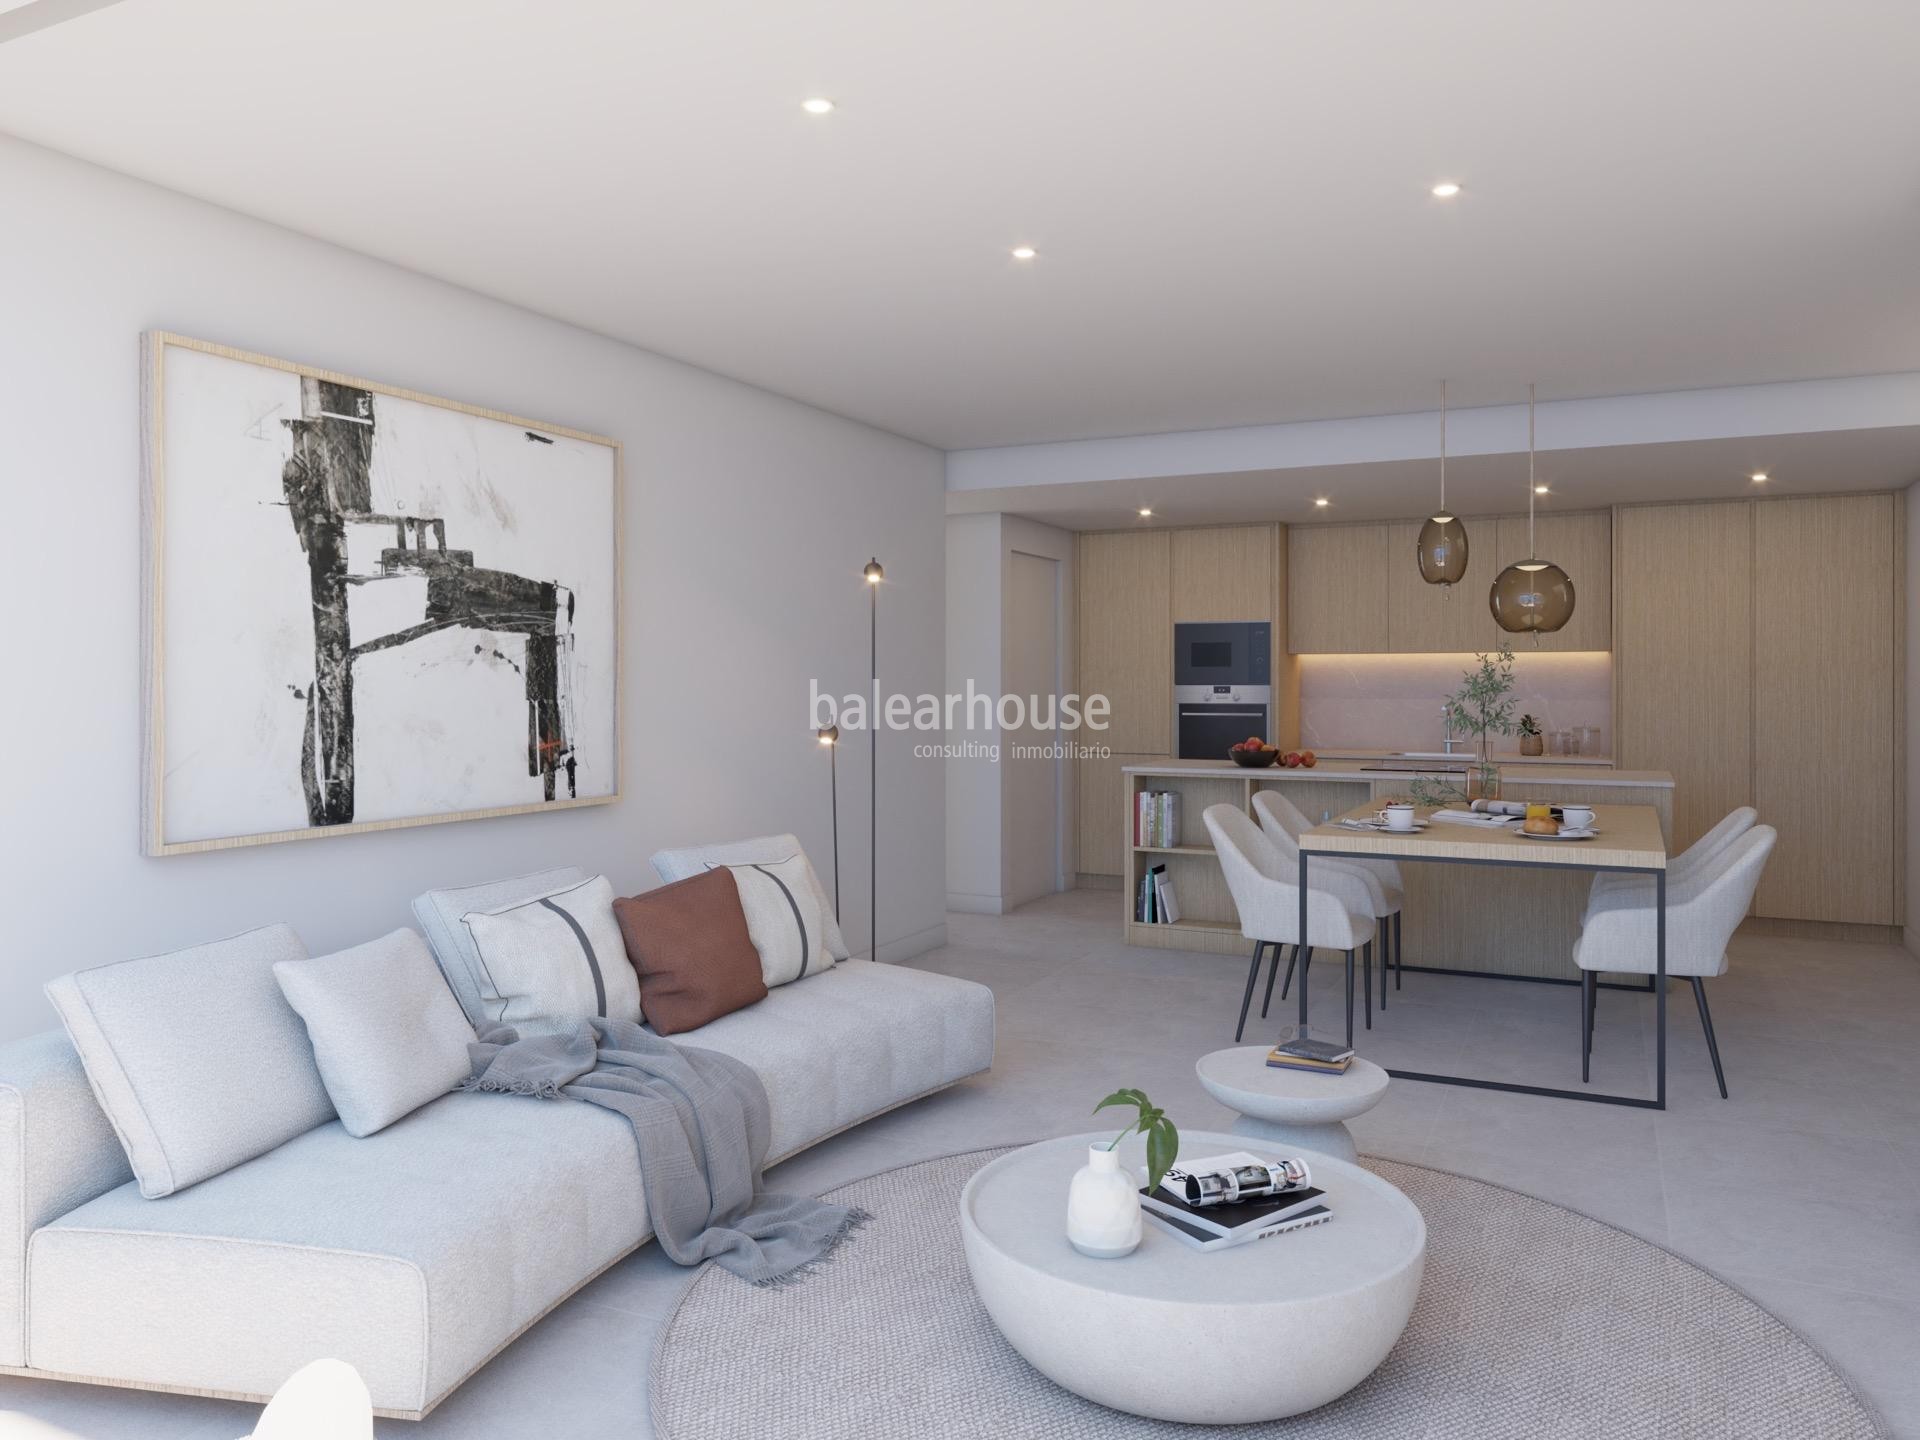 Excellent housing project with the best of current design in a protected building in Palma